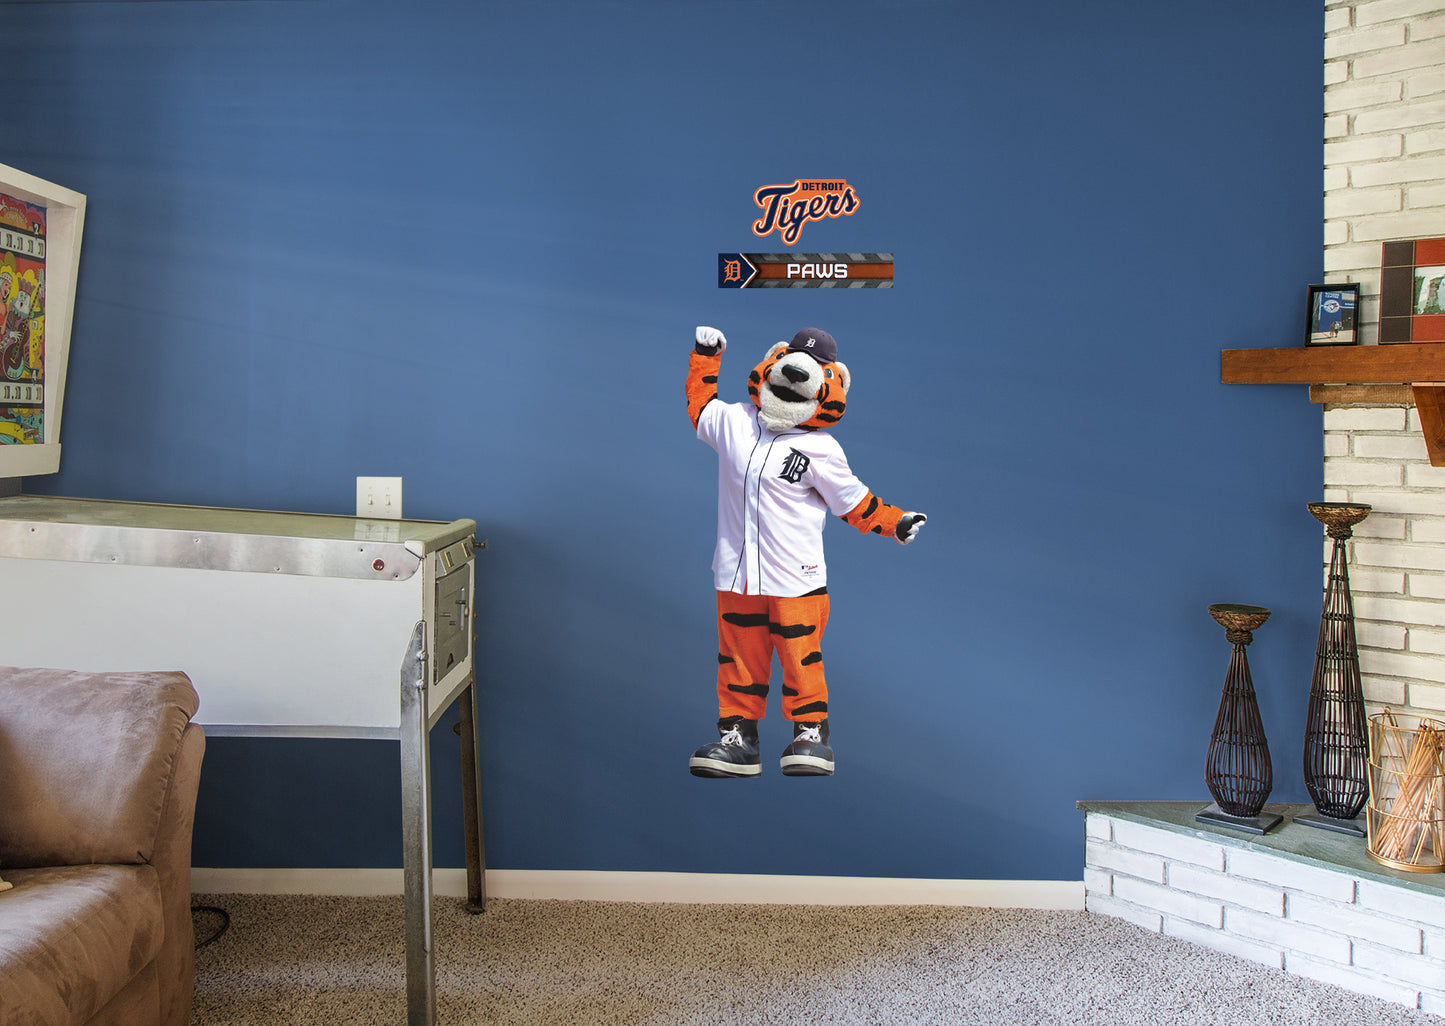 Detroit Tigers: Paws  Mascot        - Officially Licensed MLB Removable Wall   Adhesive Decal